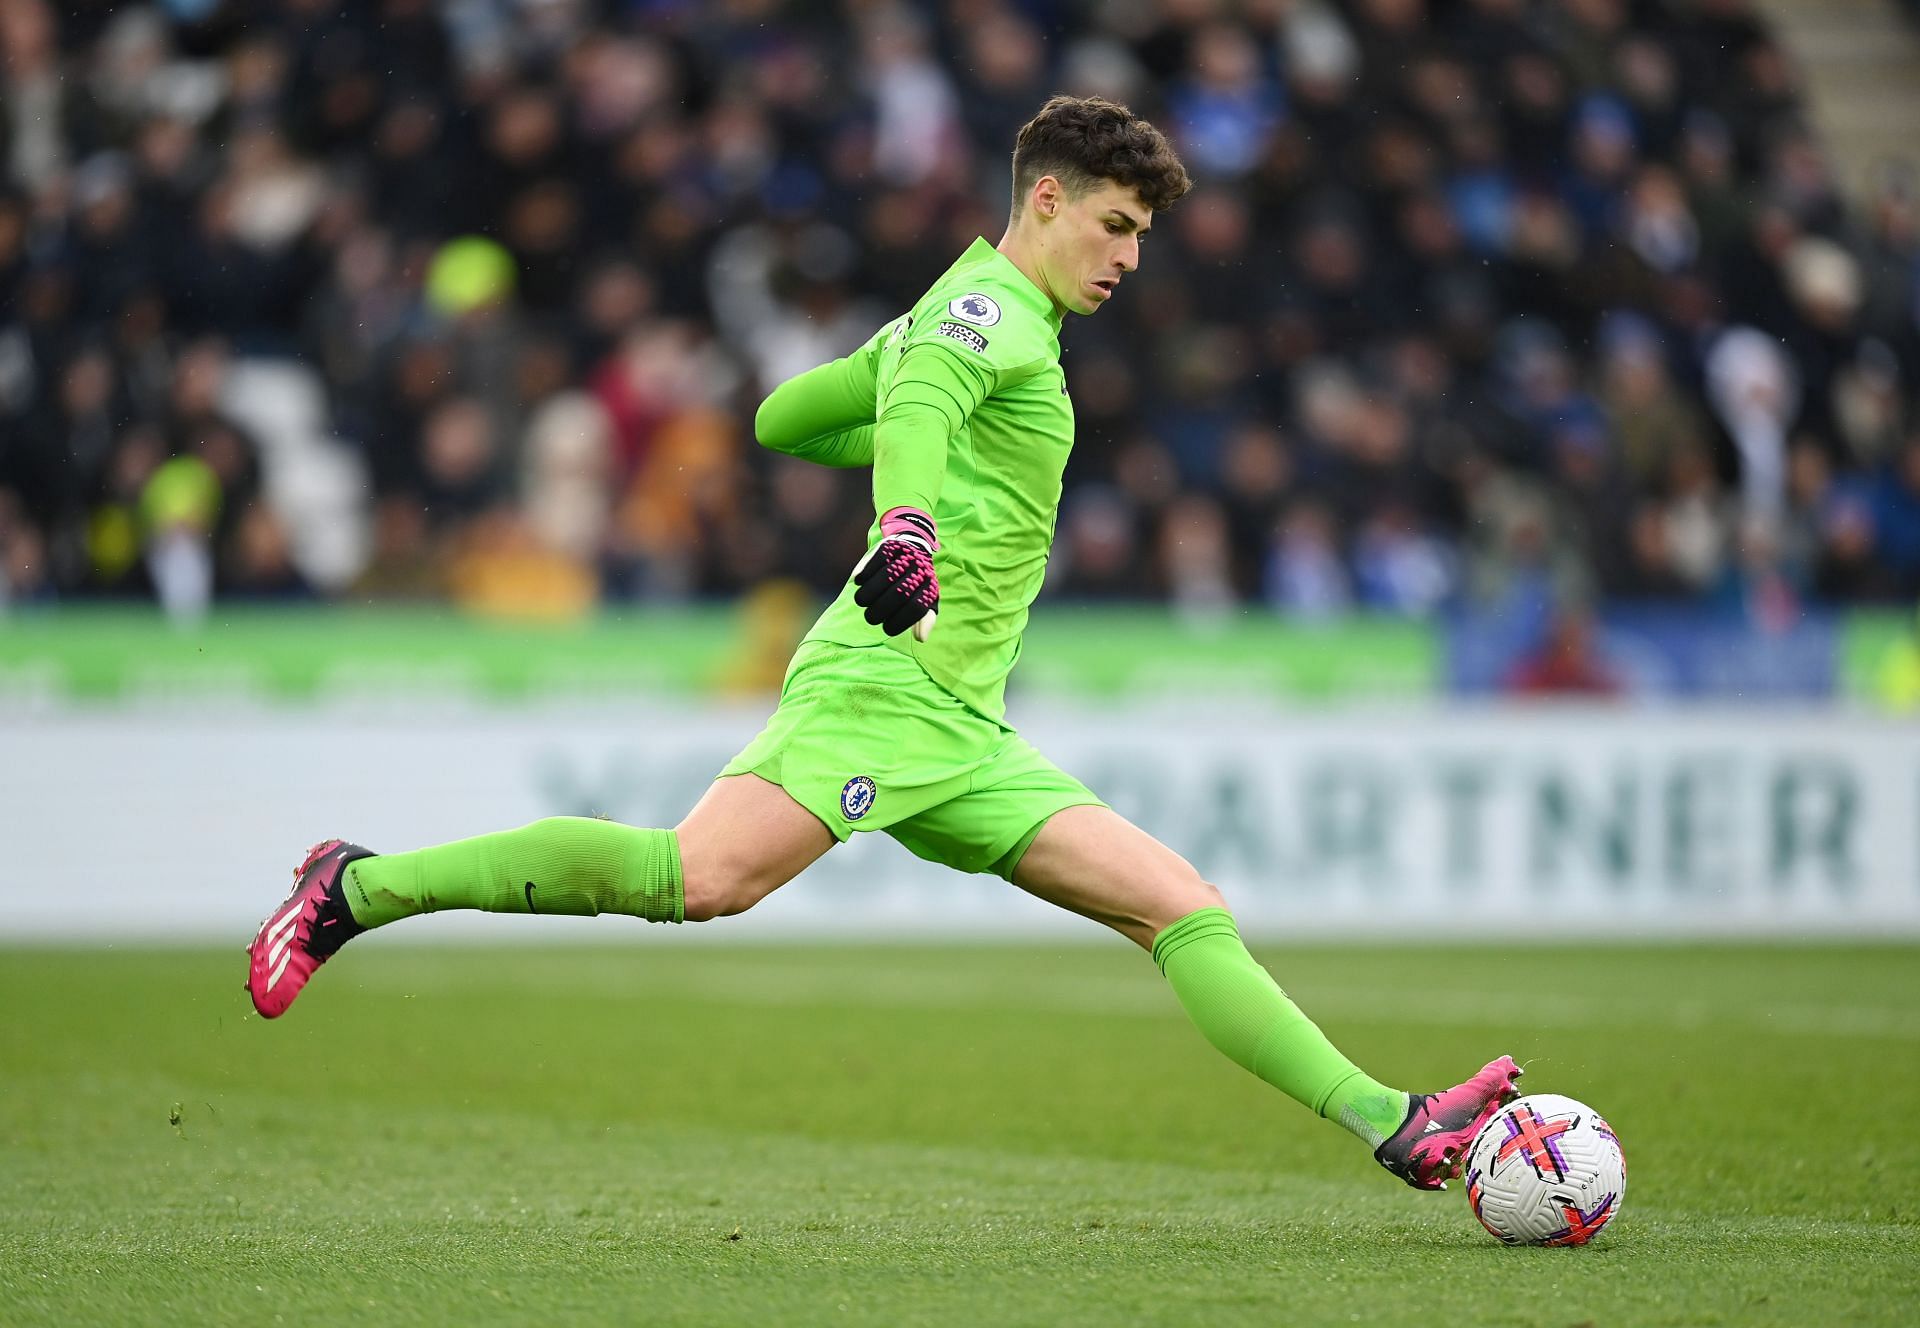 Kepa, 28, has played in 27 games for the Blues this season.